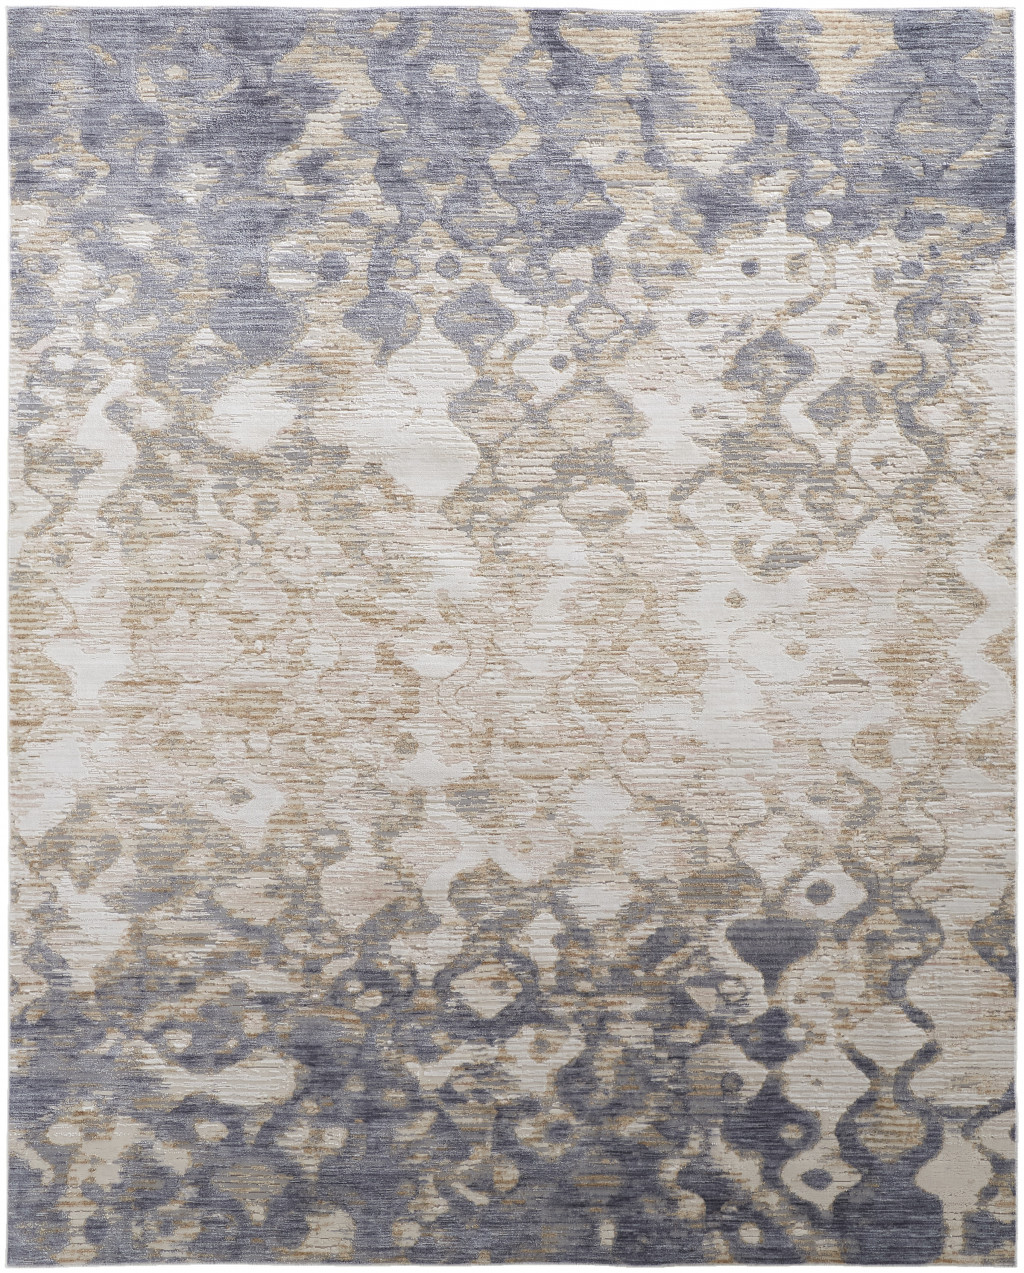 8' X 10' Tan Ivory And Blue Abstract Power Loom Distressed Area Rug-514160-1